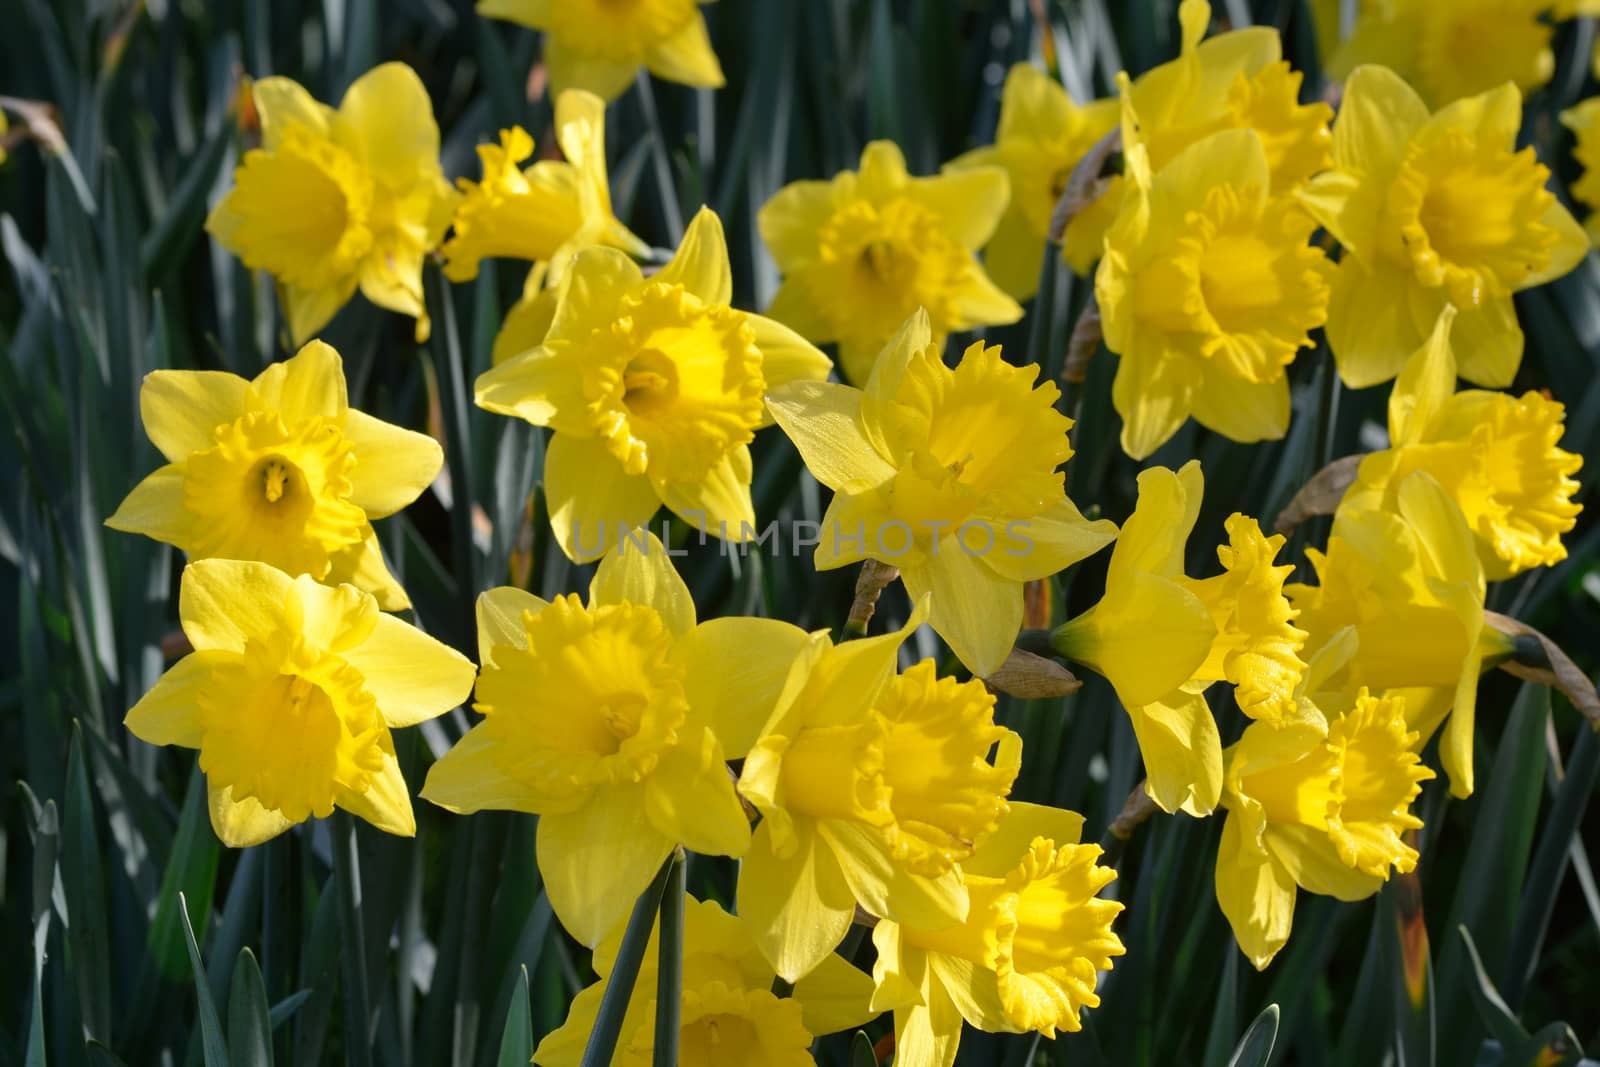 small group of daffodils by pauws99